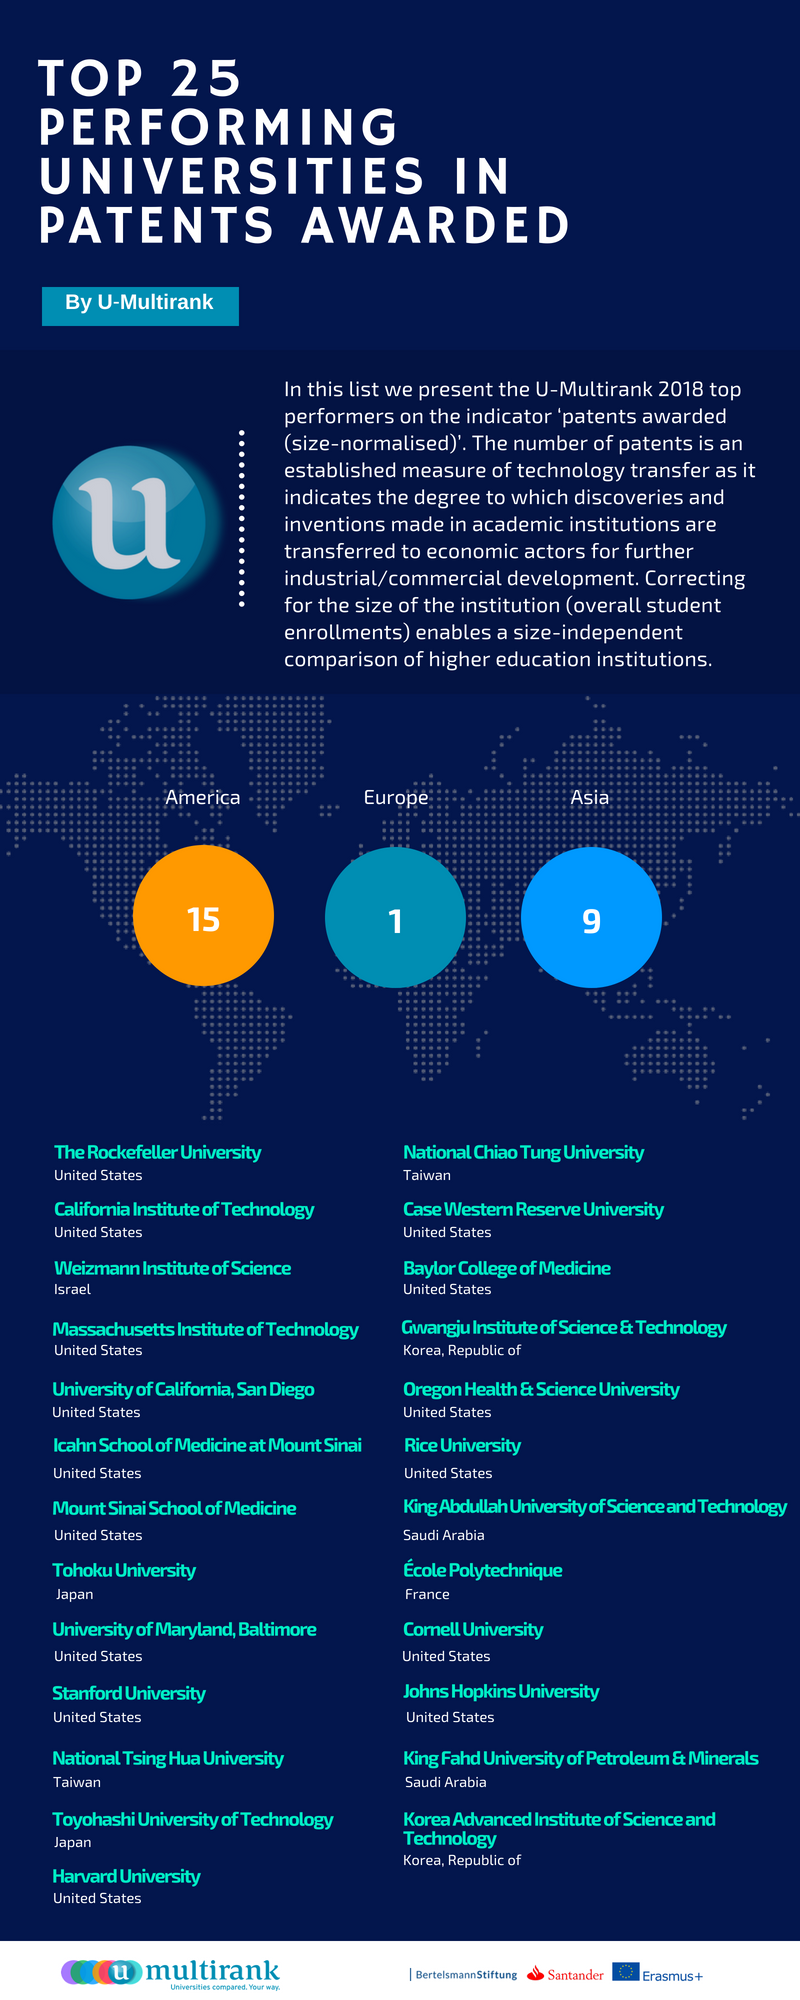 Top 25 Universities in Patents Awarded